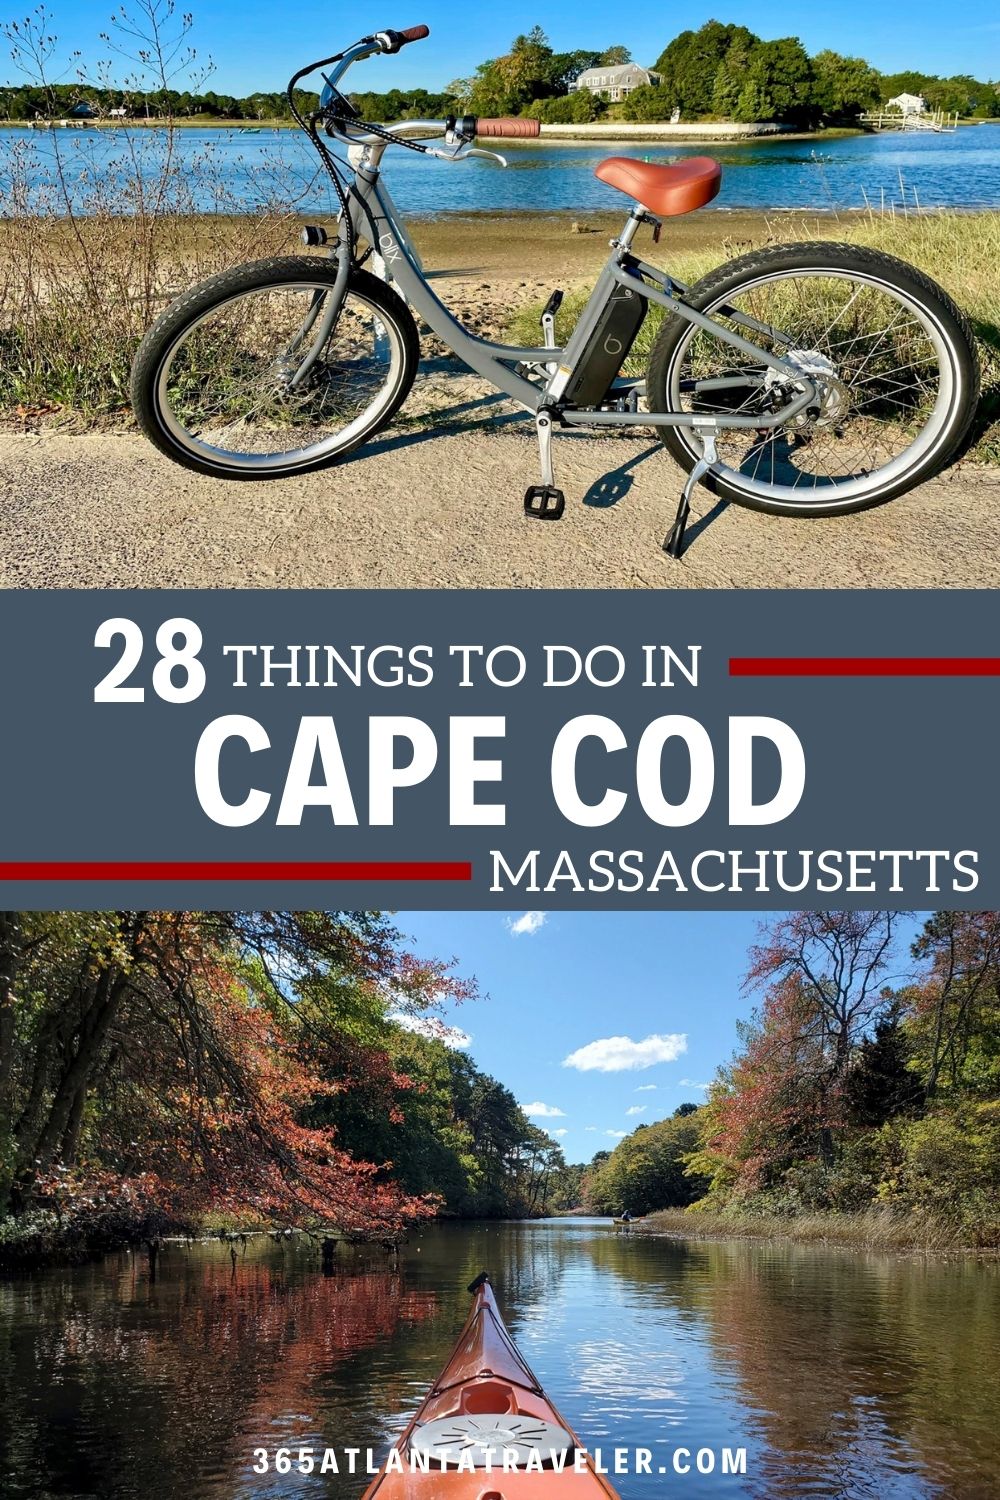 28 THINGS TO DO IN CAPE COD YOU JUST CAN'T MISS